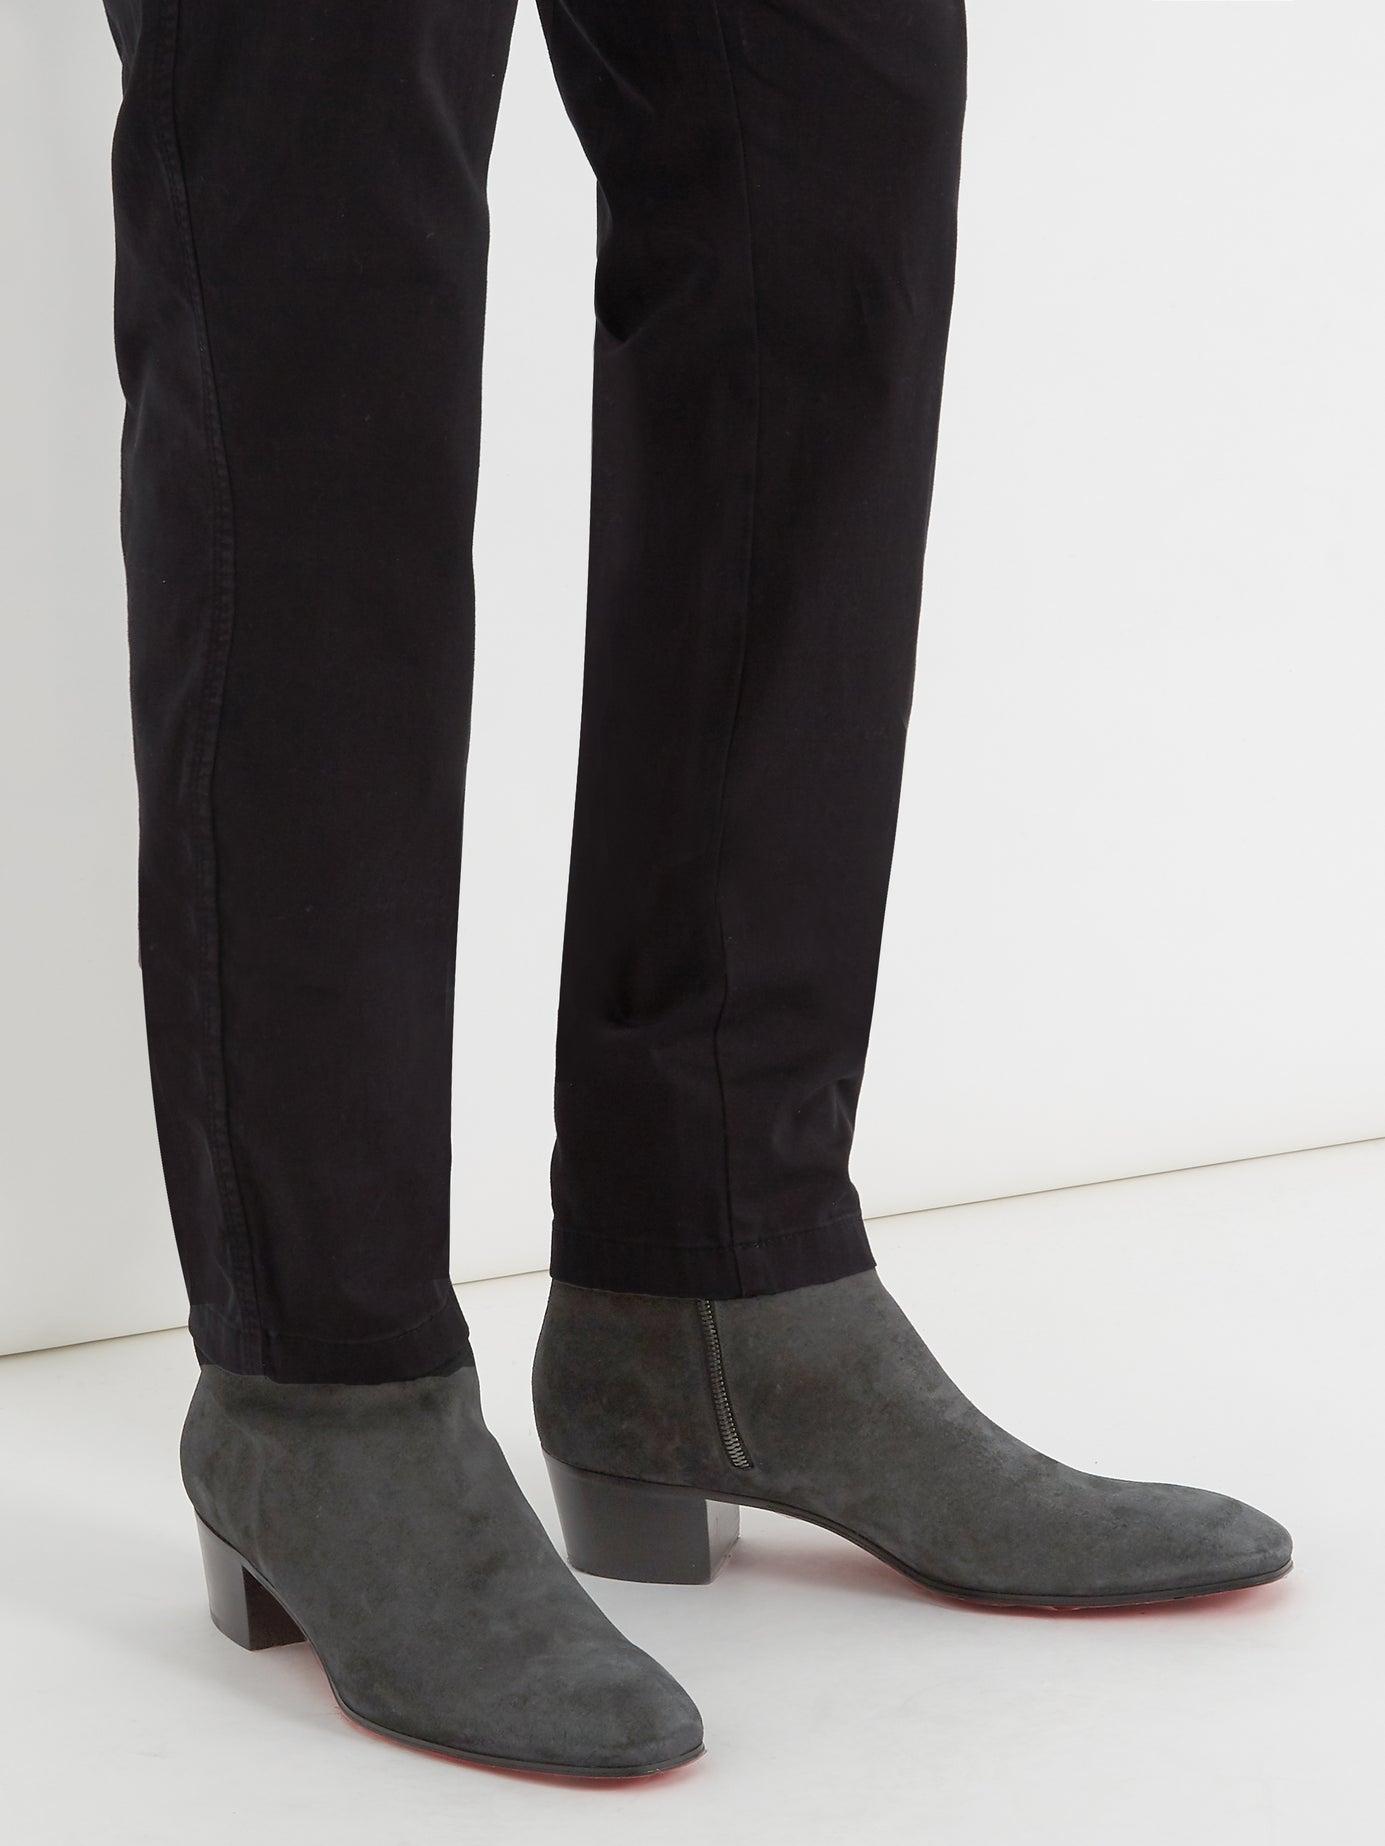 Christian Louboutin Huston Suede Boots in Black for Men